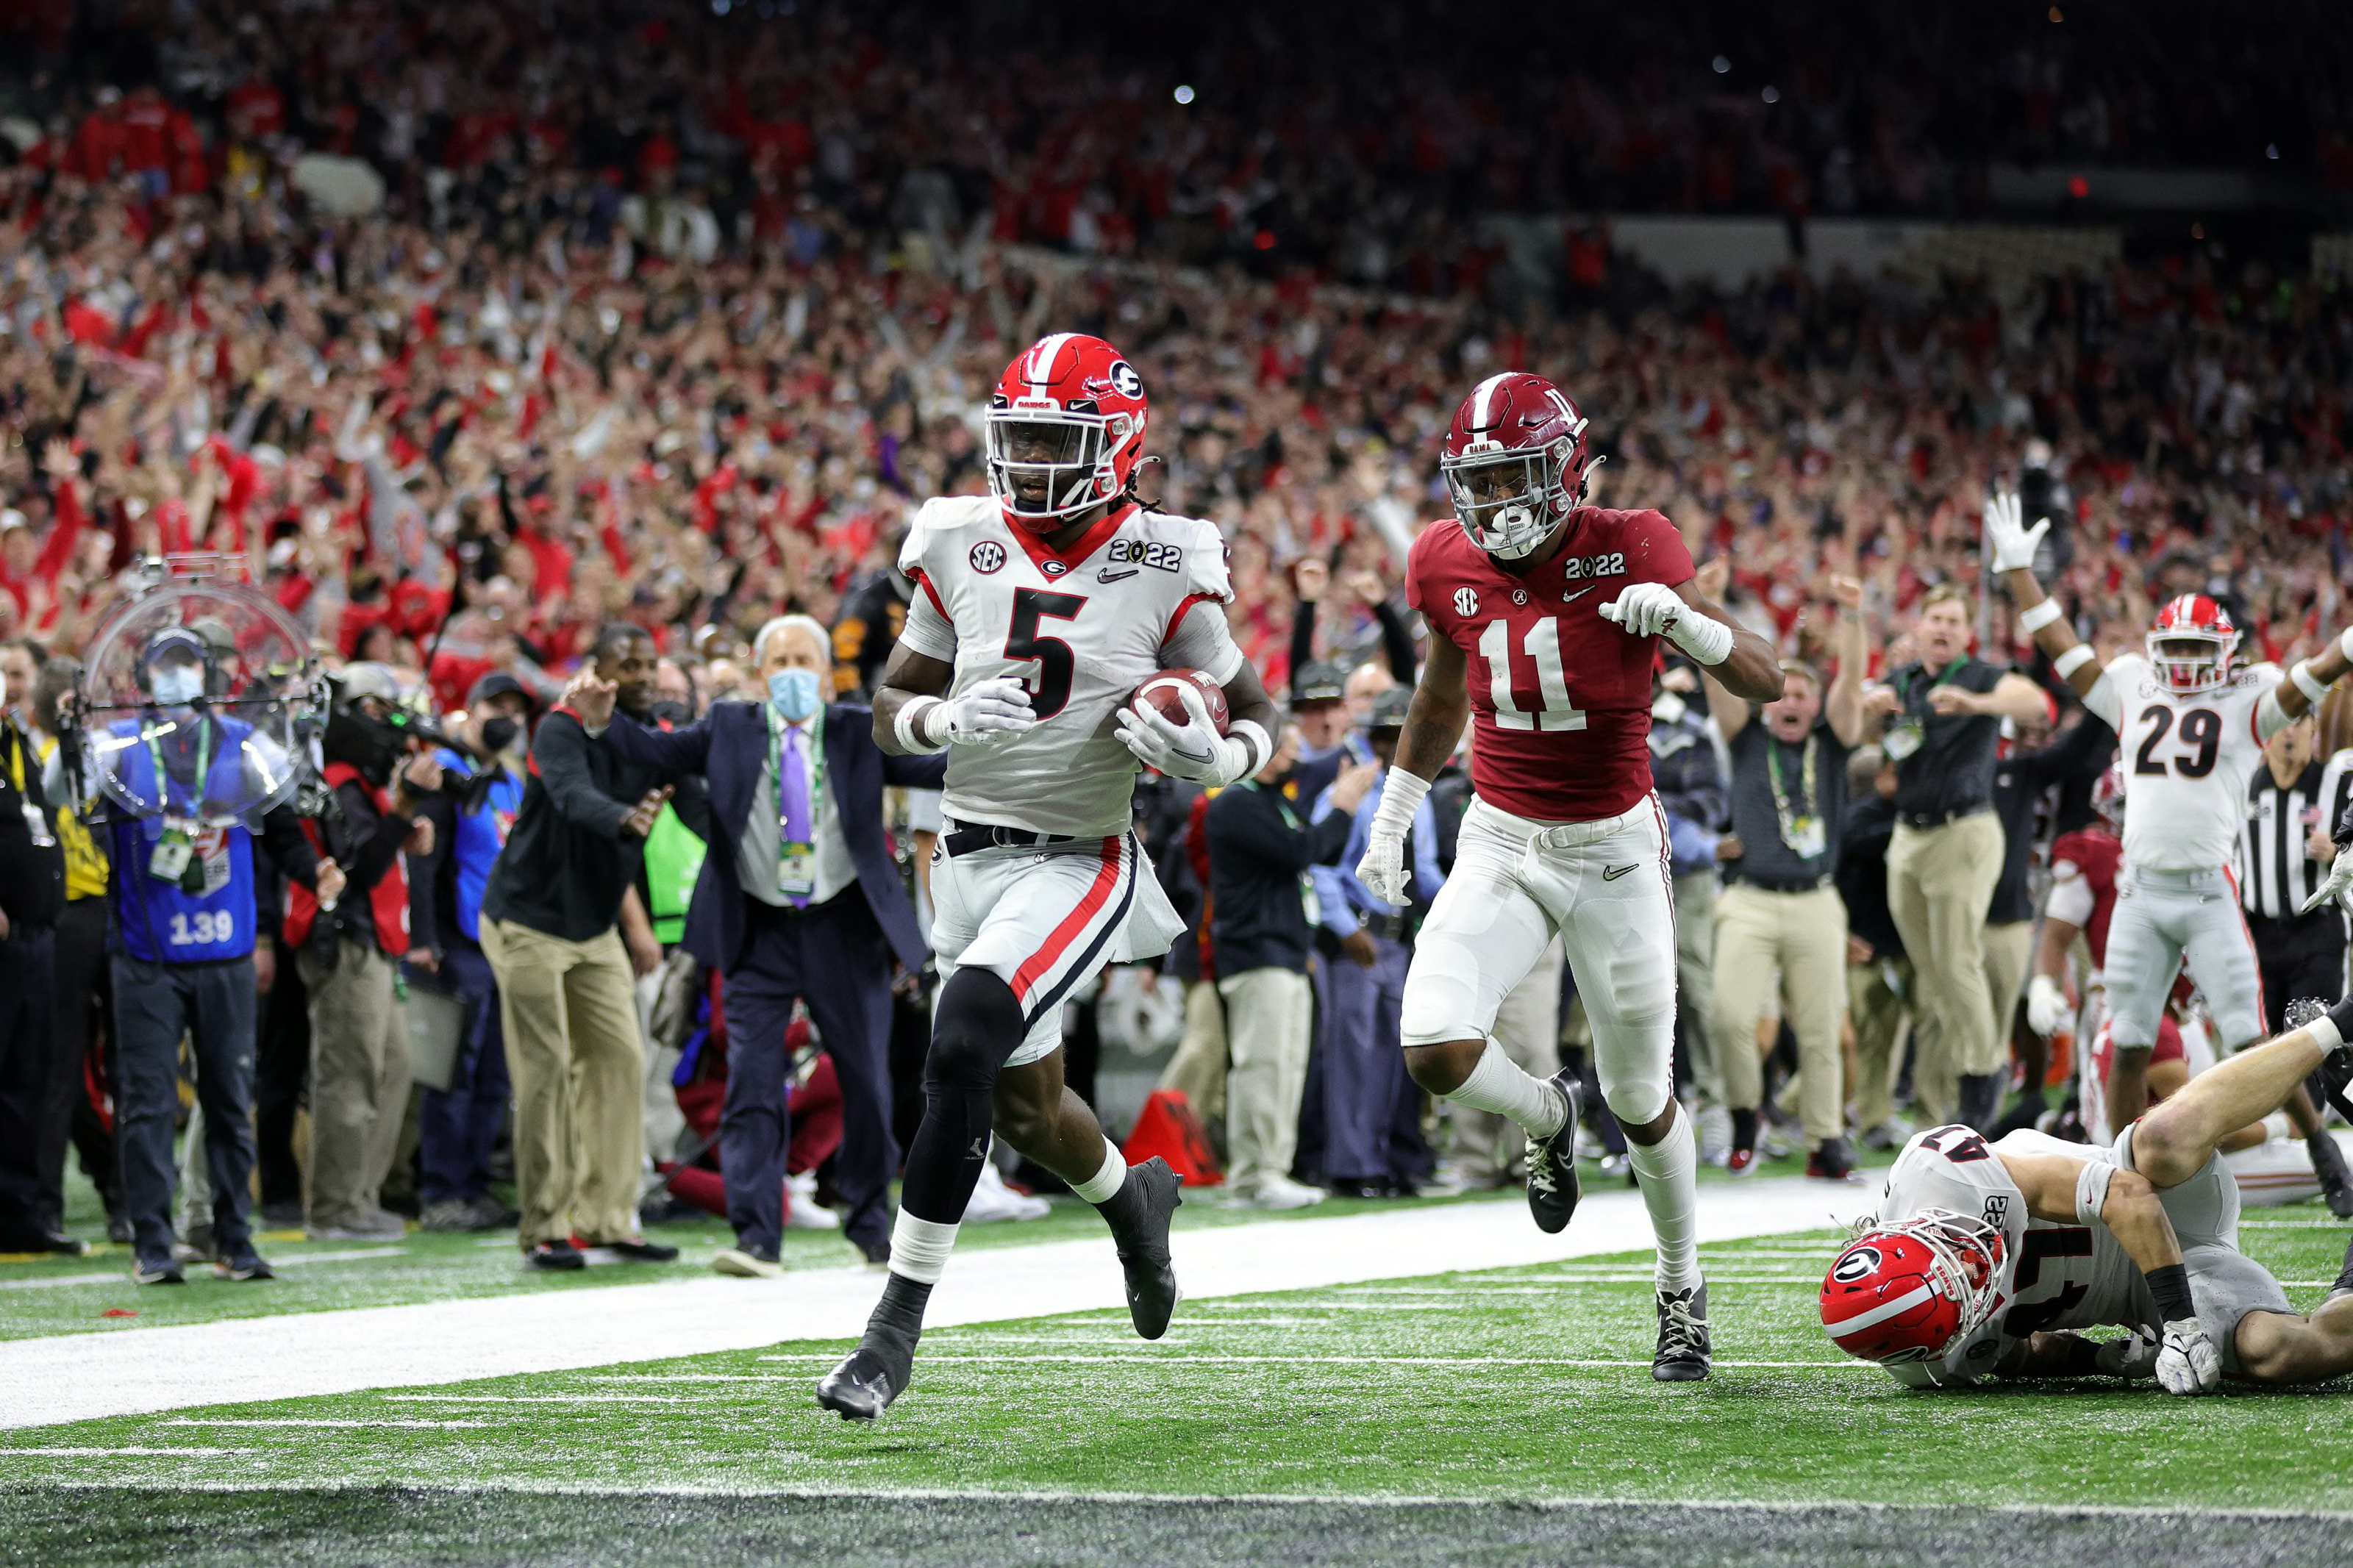 Georgia football: 6 exciting takeaways from the national title